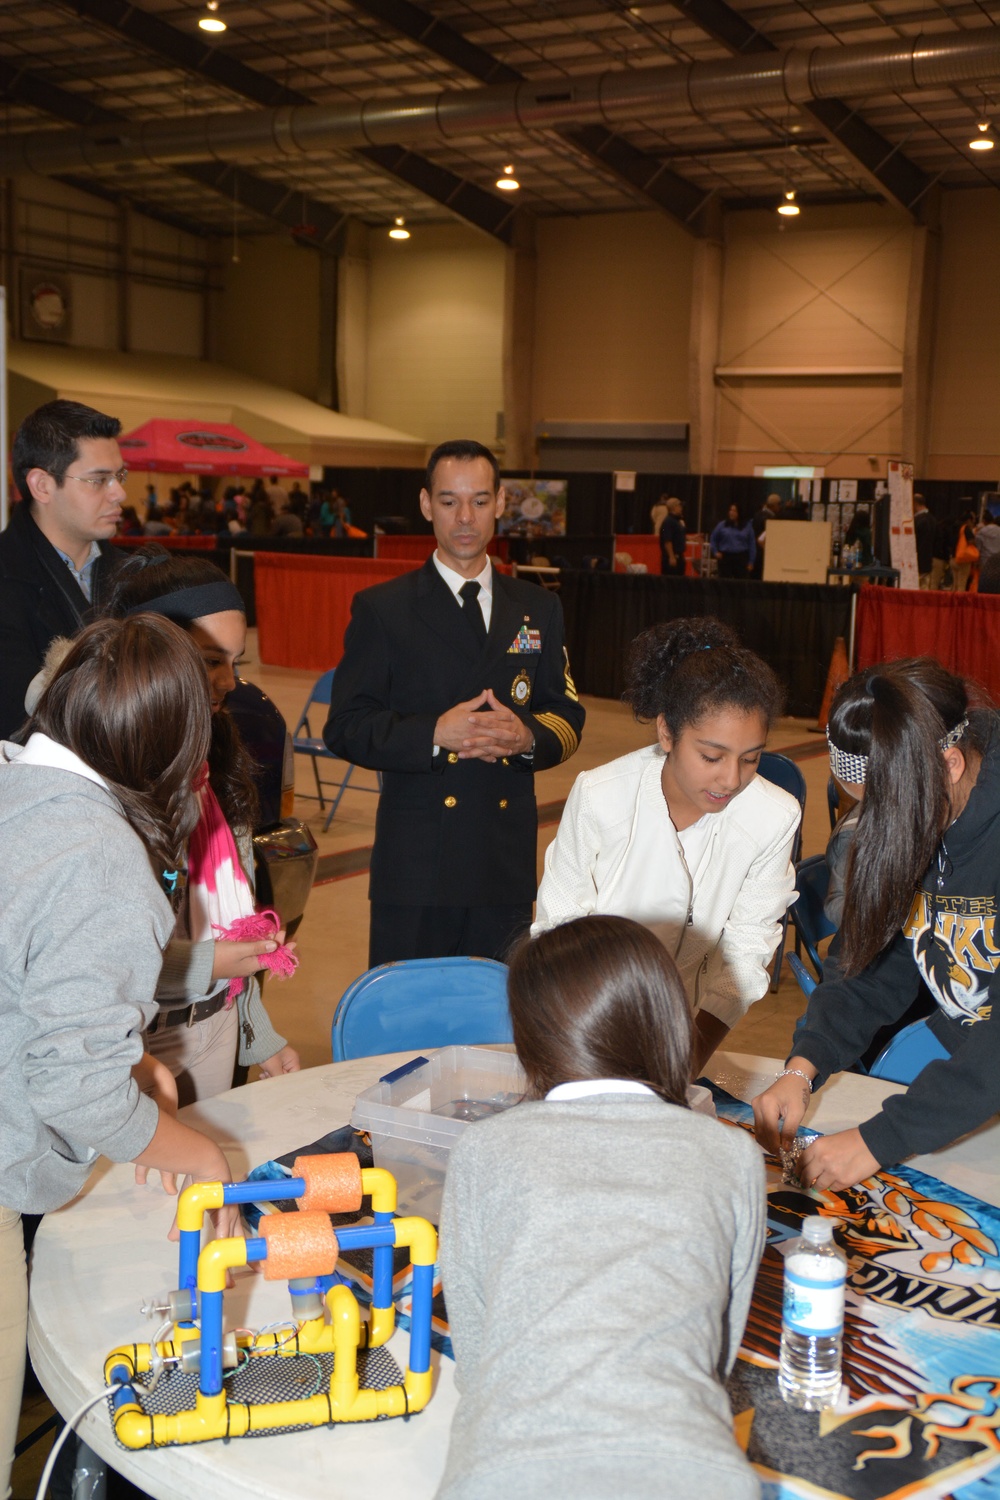 America’s Navy reaches out to students during Annual CORE4 STEM EXPO